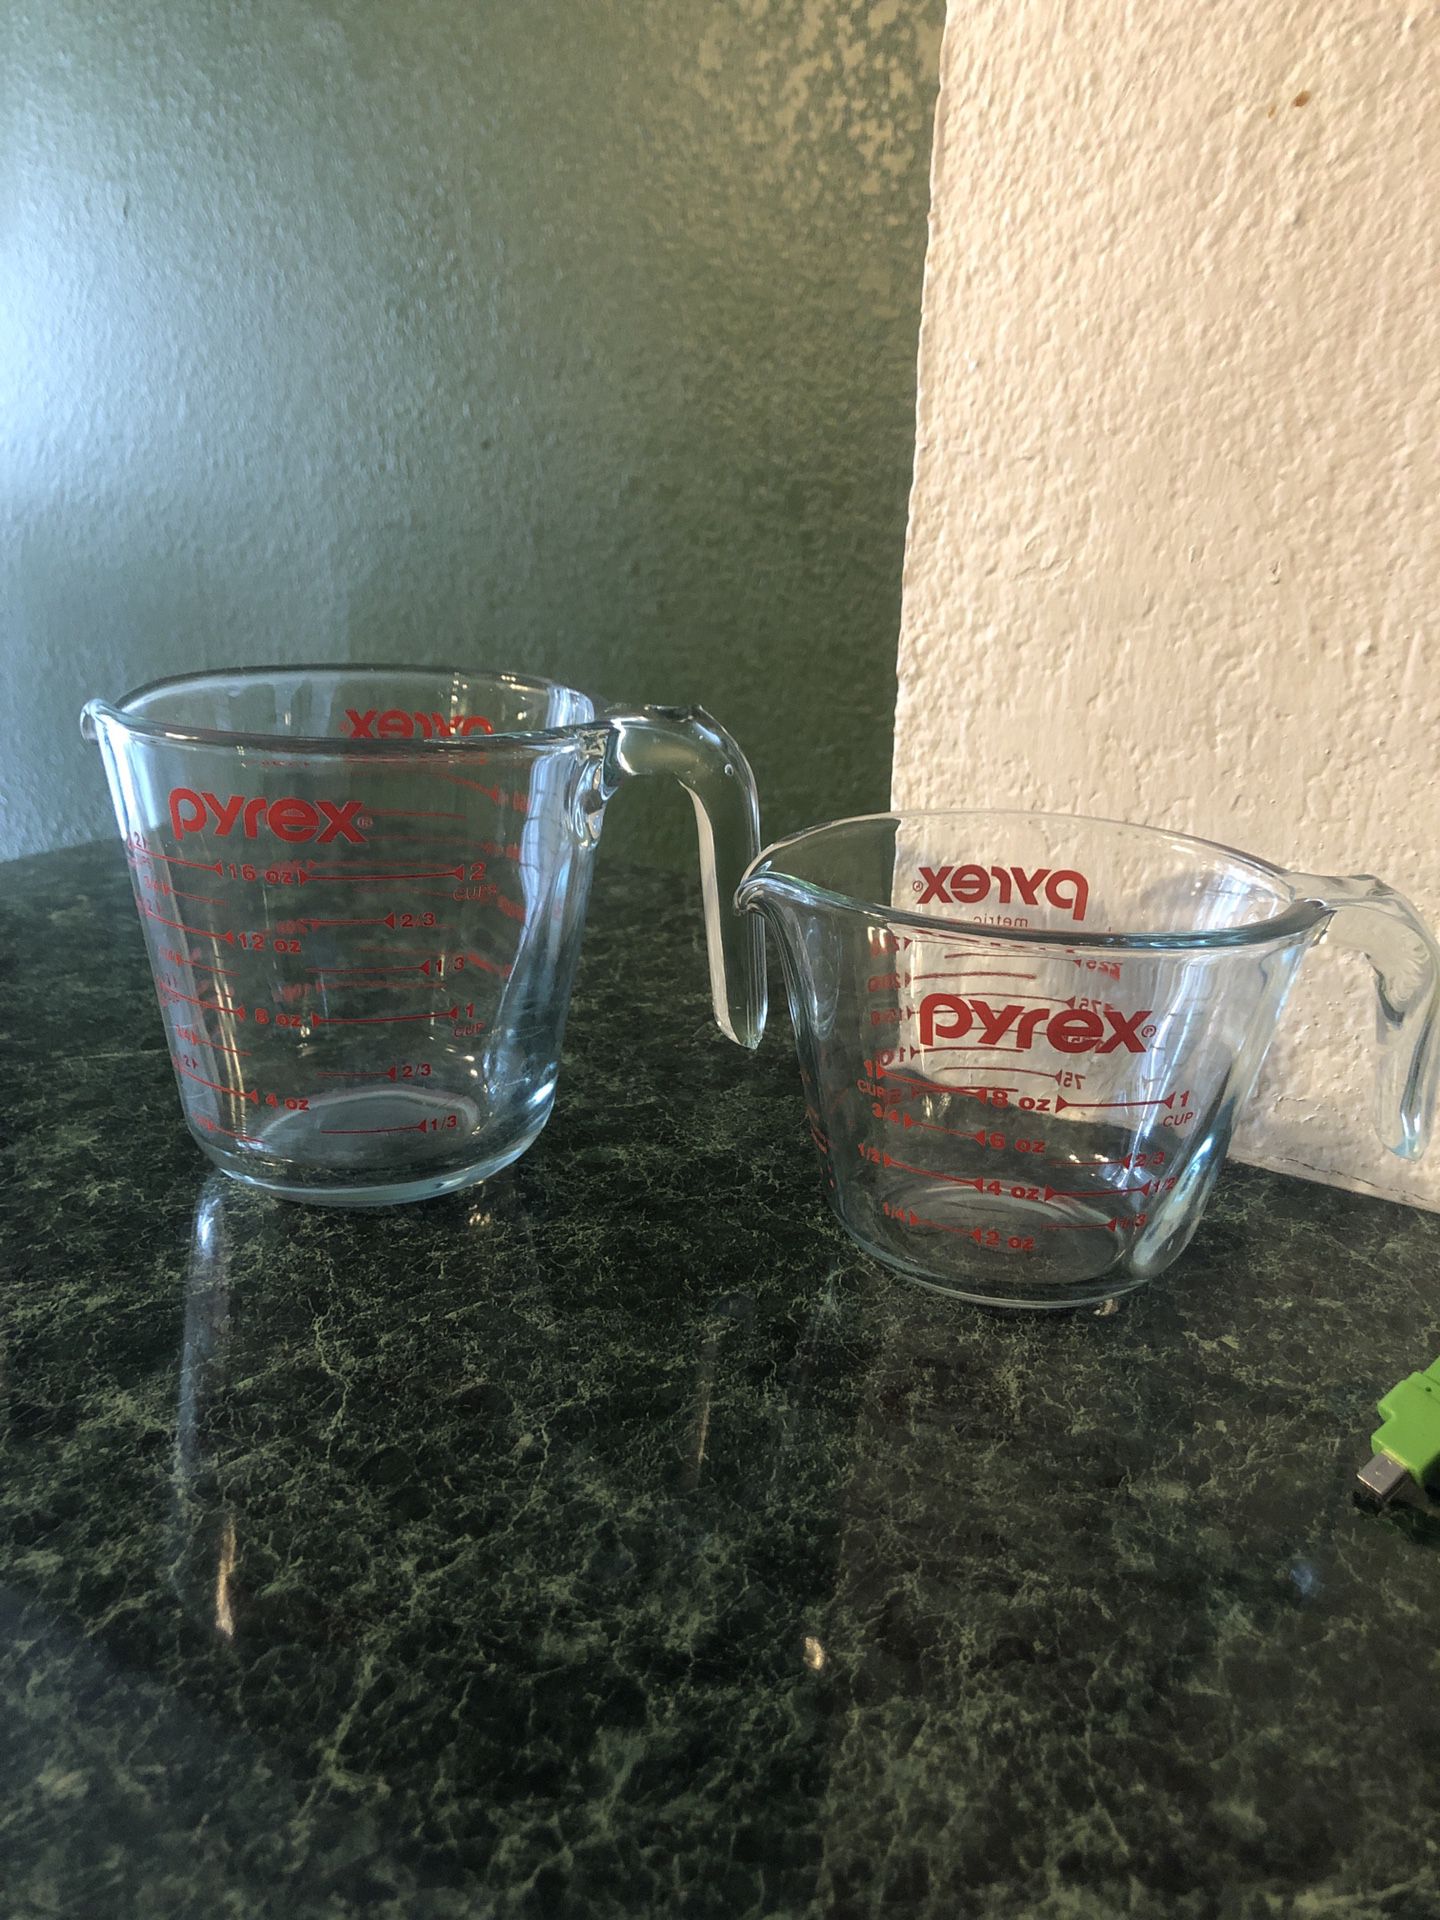 Set of Pyrex glass measuring cups, 2 cup size and 1 cup size